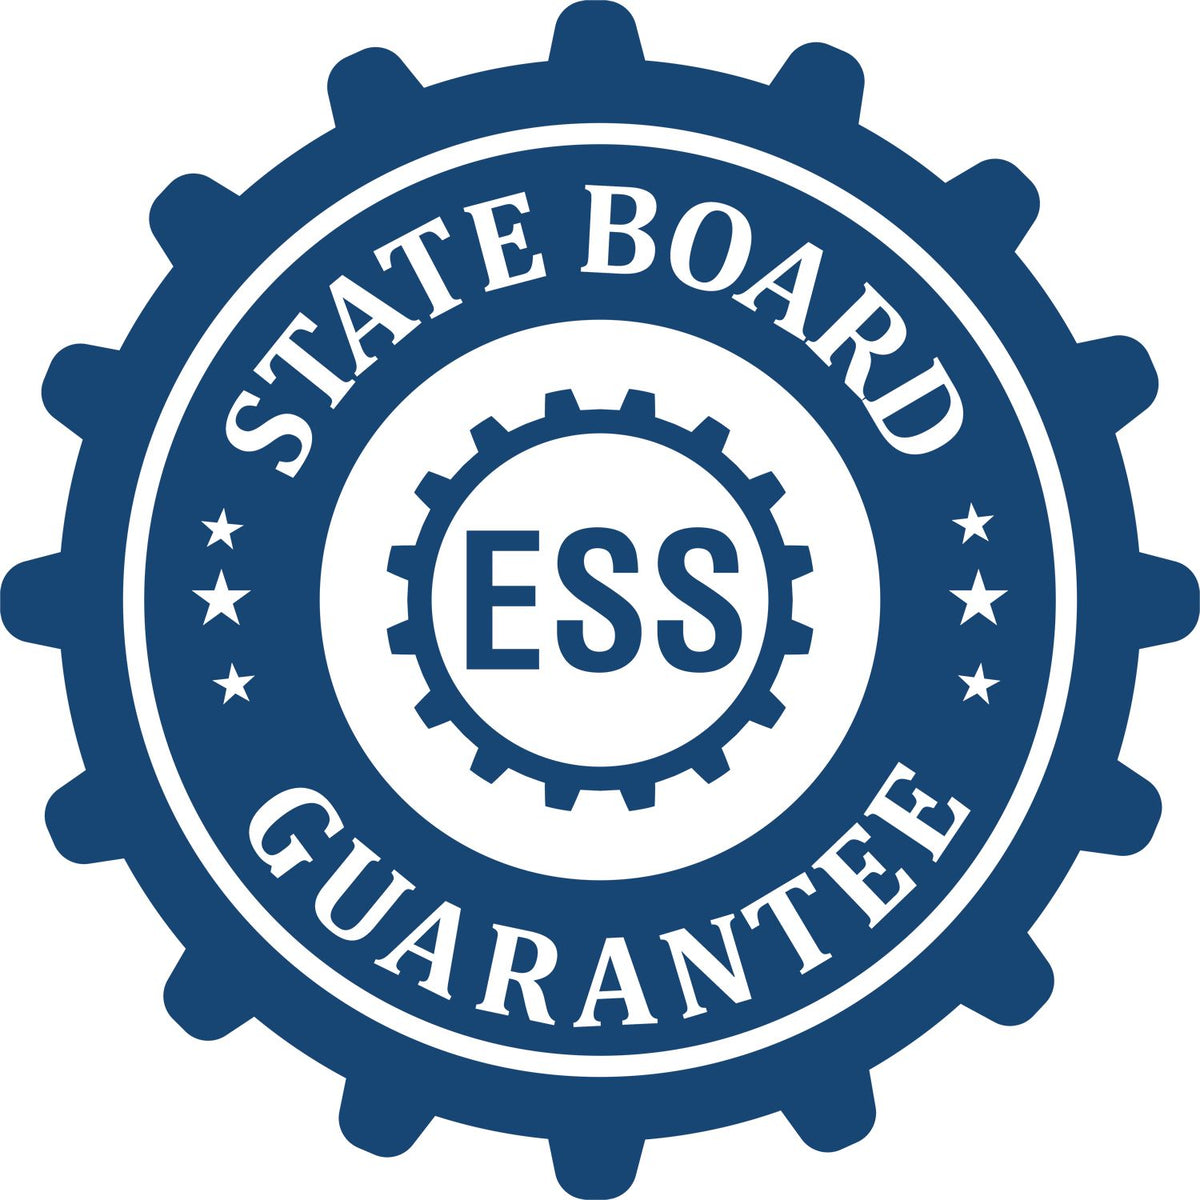 An emblem in a gear shape illustrating a state board guarantee for the Wooden Handle Kansas State Seal Notary Public Stamp product.